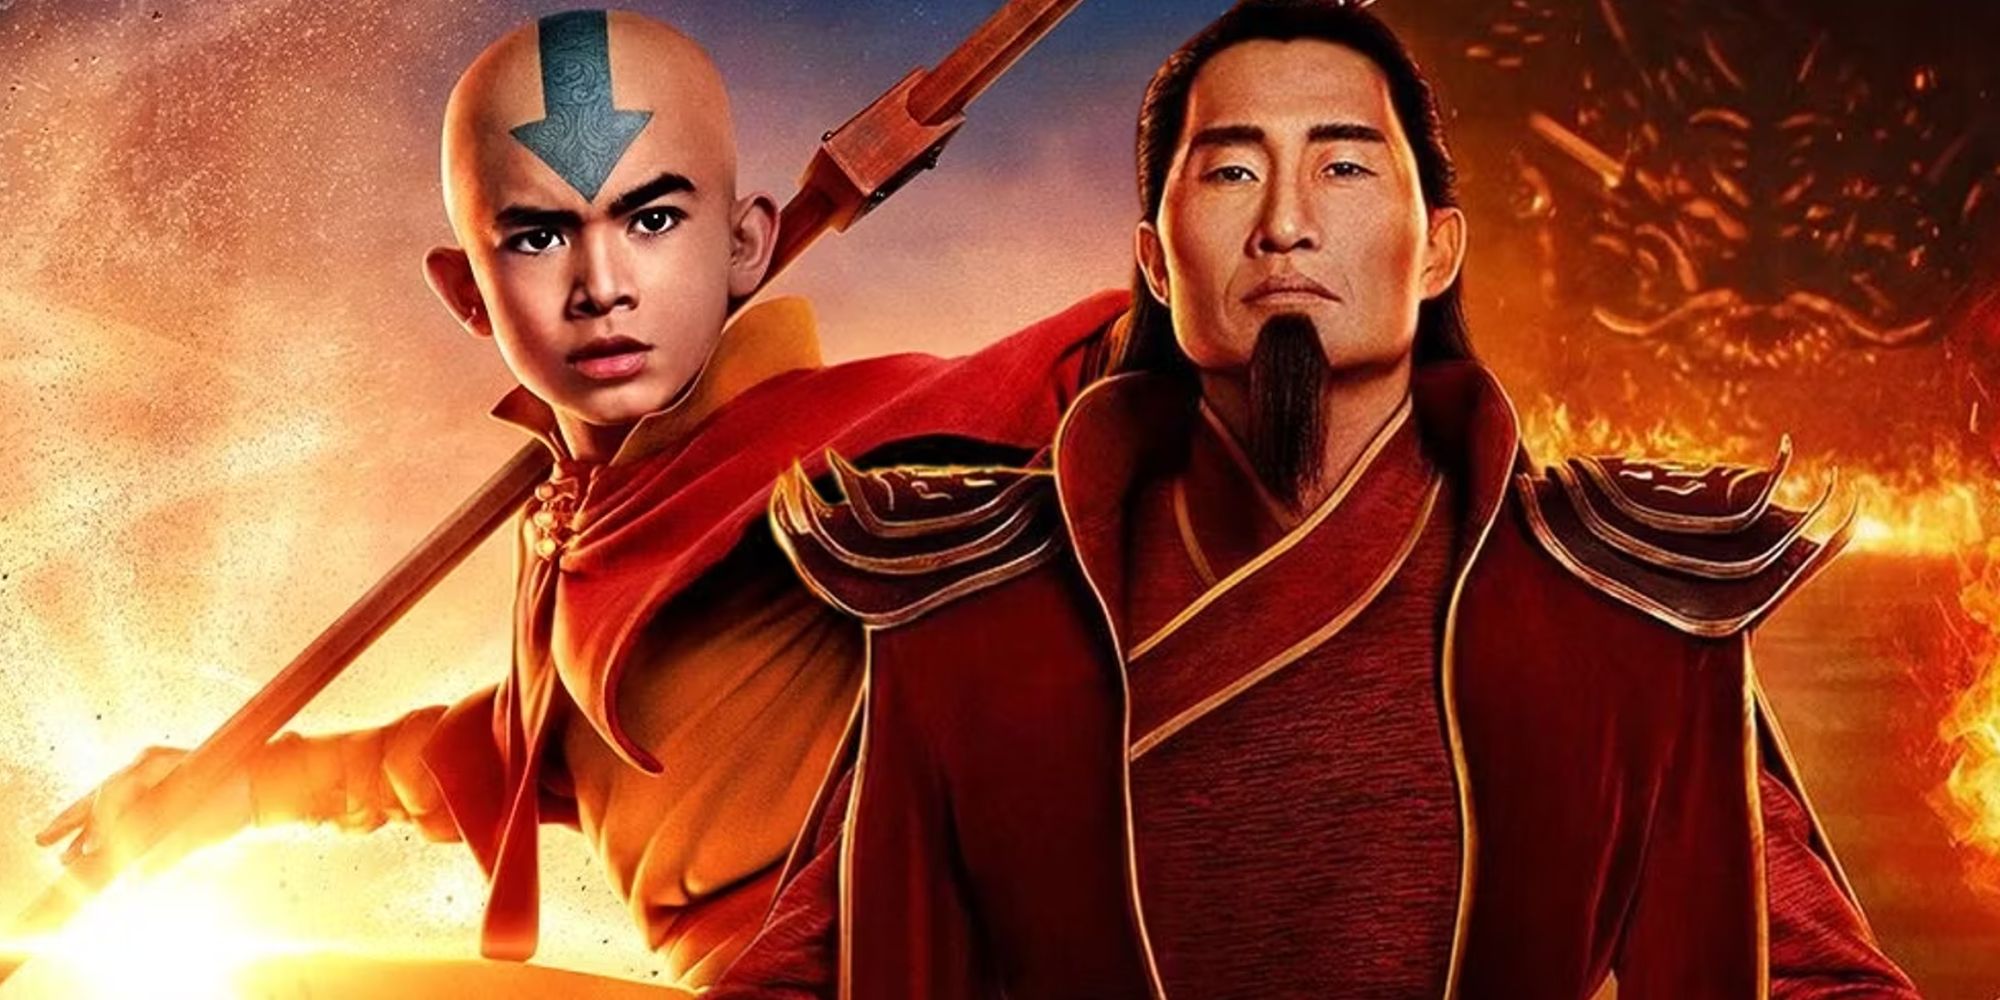 The character posters for Aang and Ozai from Netflix's Avatar: The Last Airbender